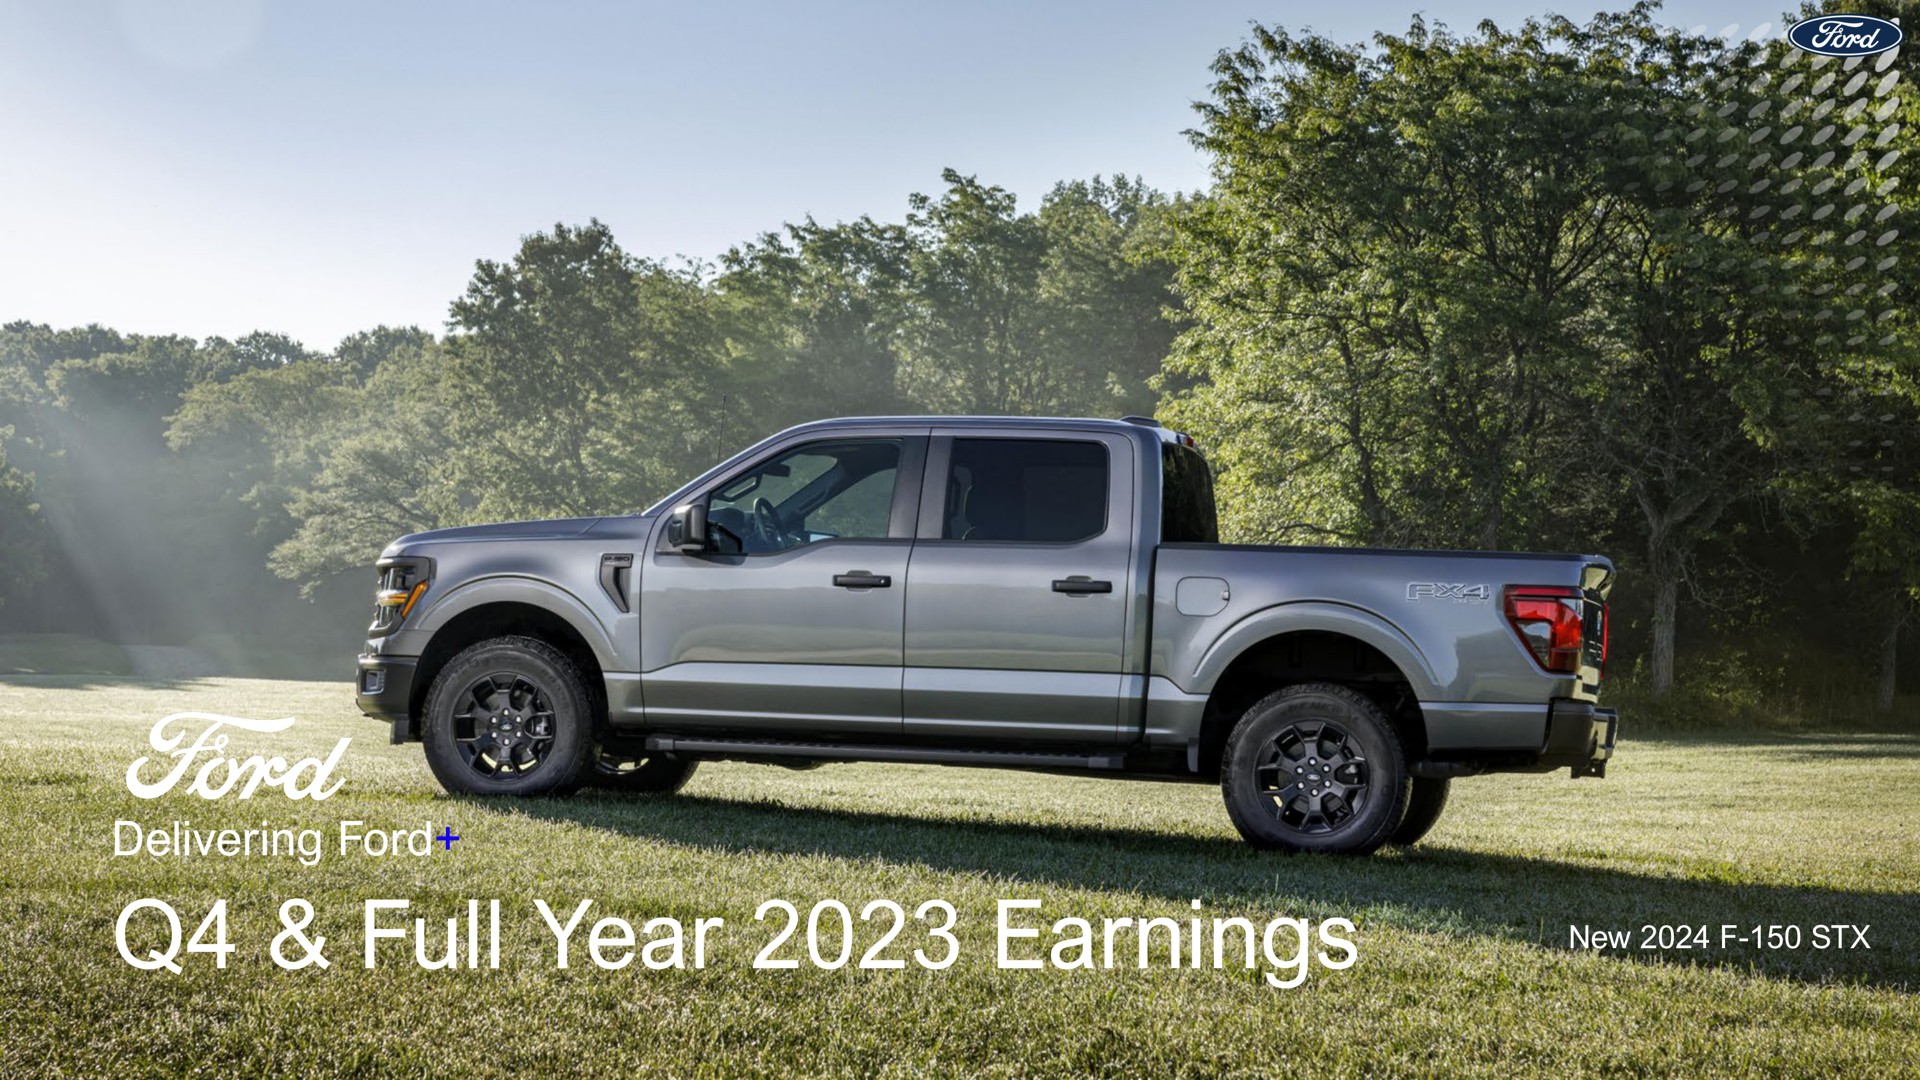 delivering ford full year earnings | Ford